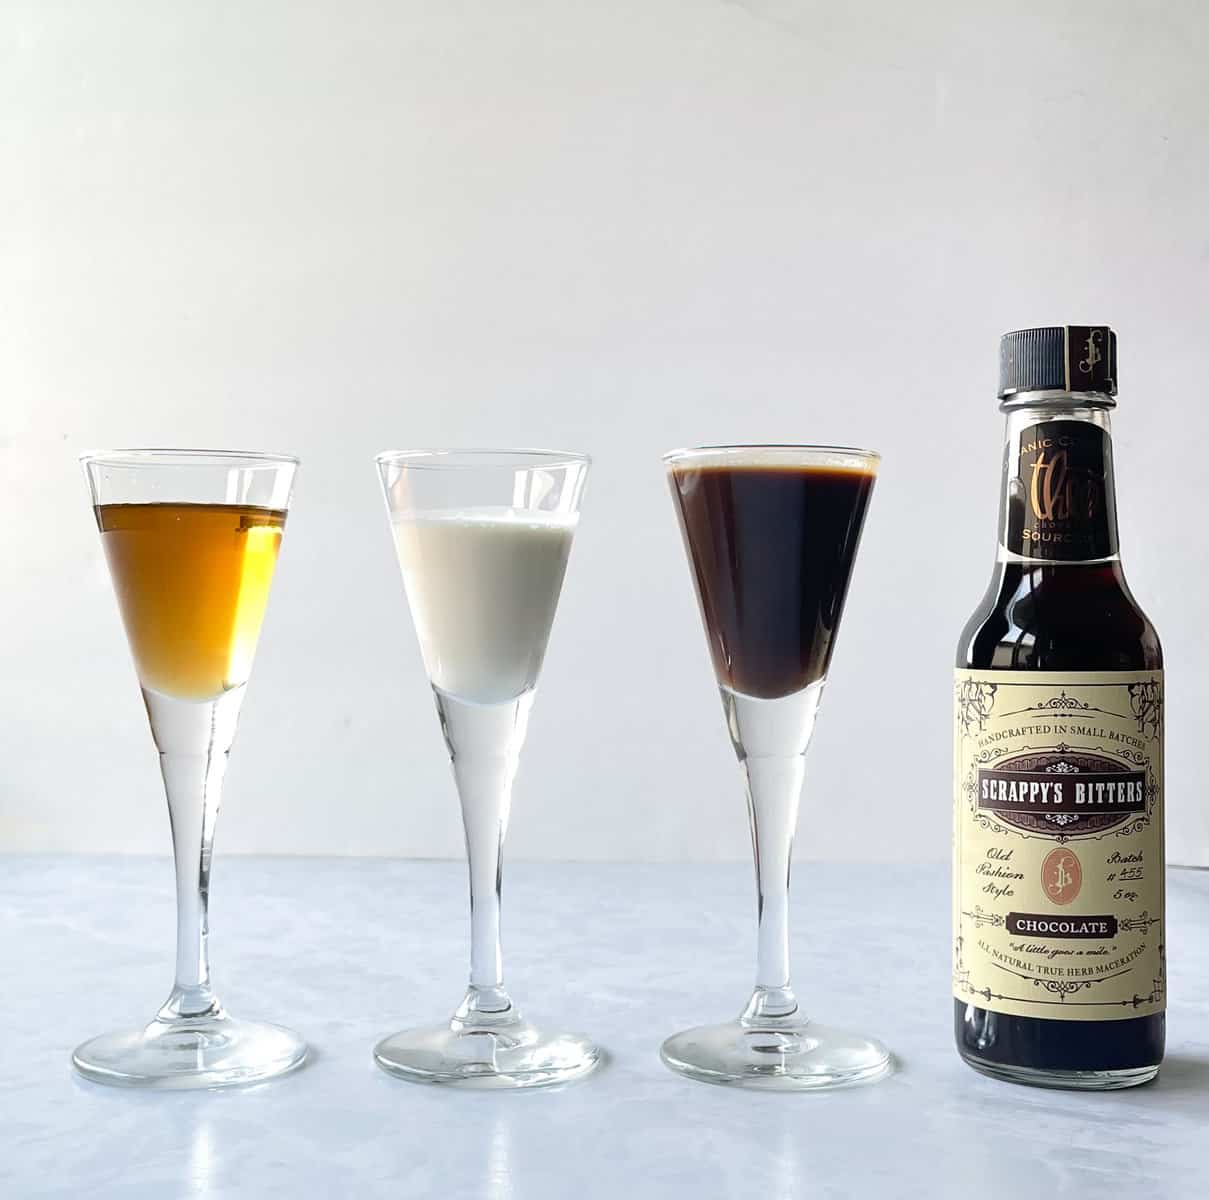 bottle of chocolate bitters and three small glasses of amber, white, and chocolate-colored liquids.